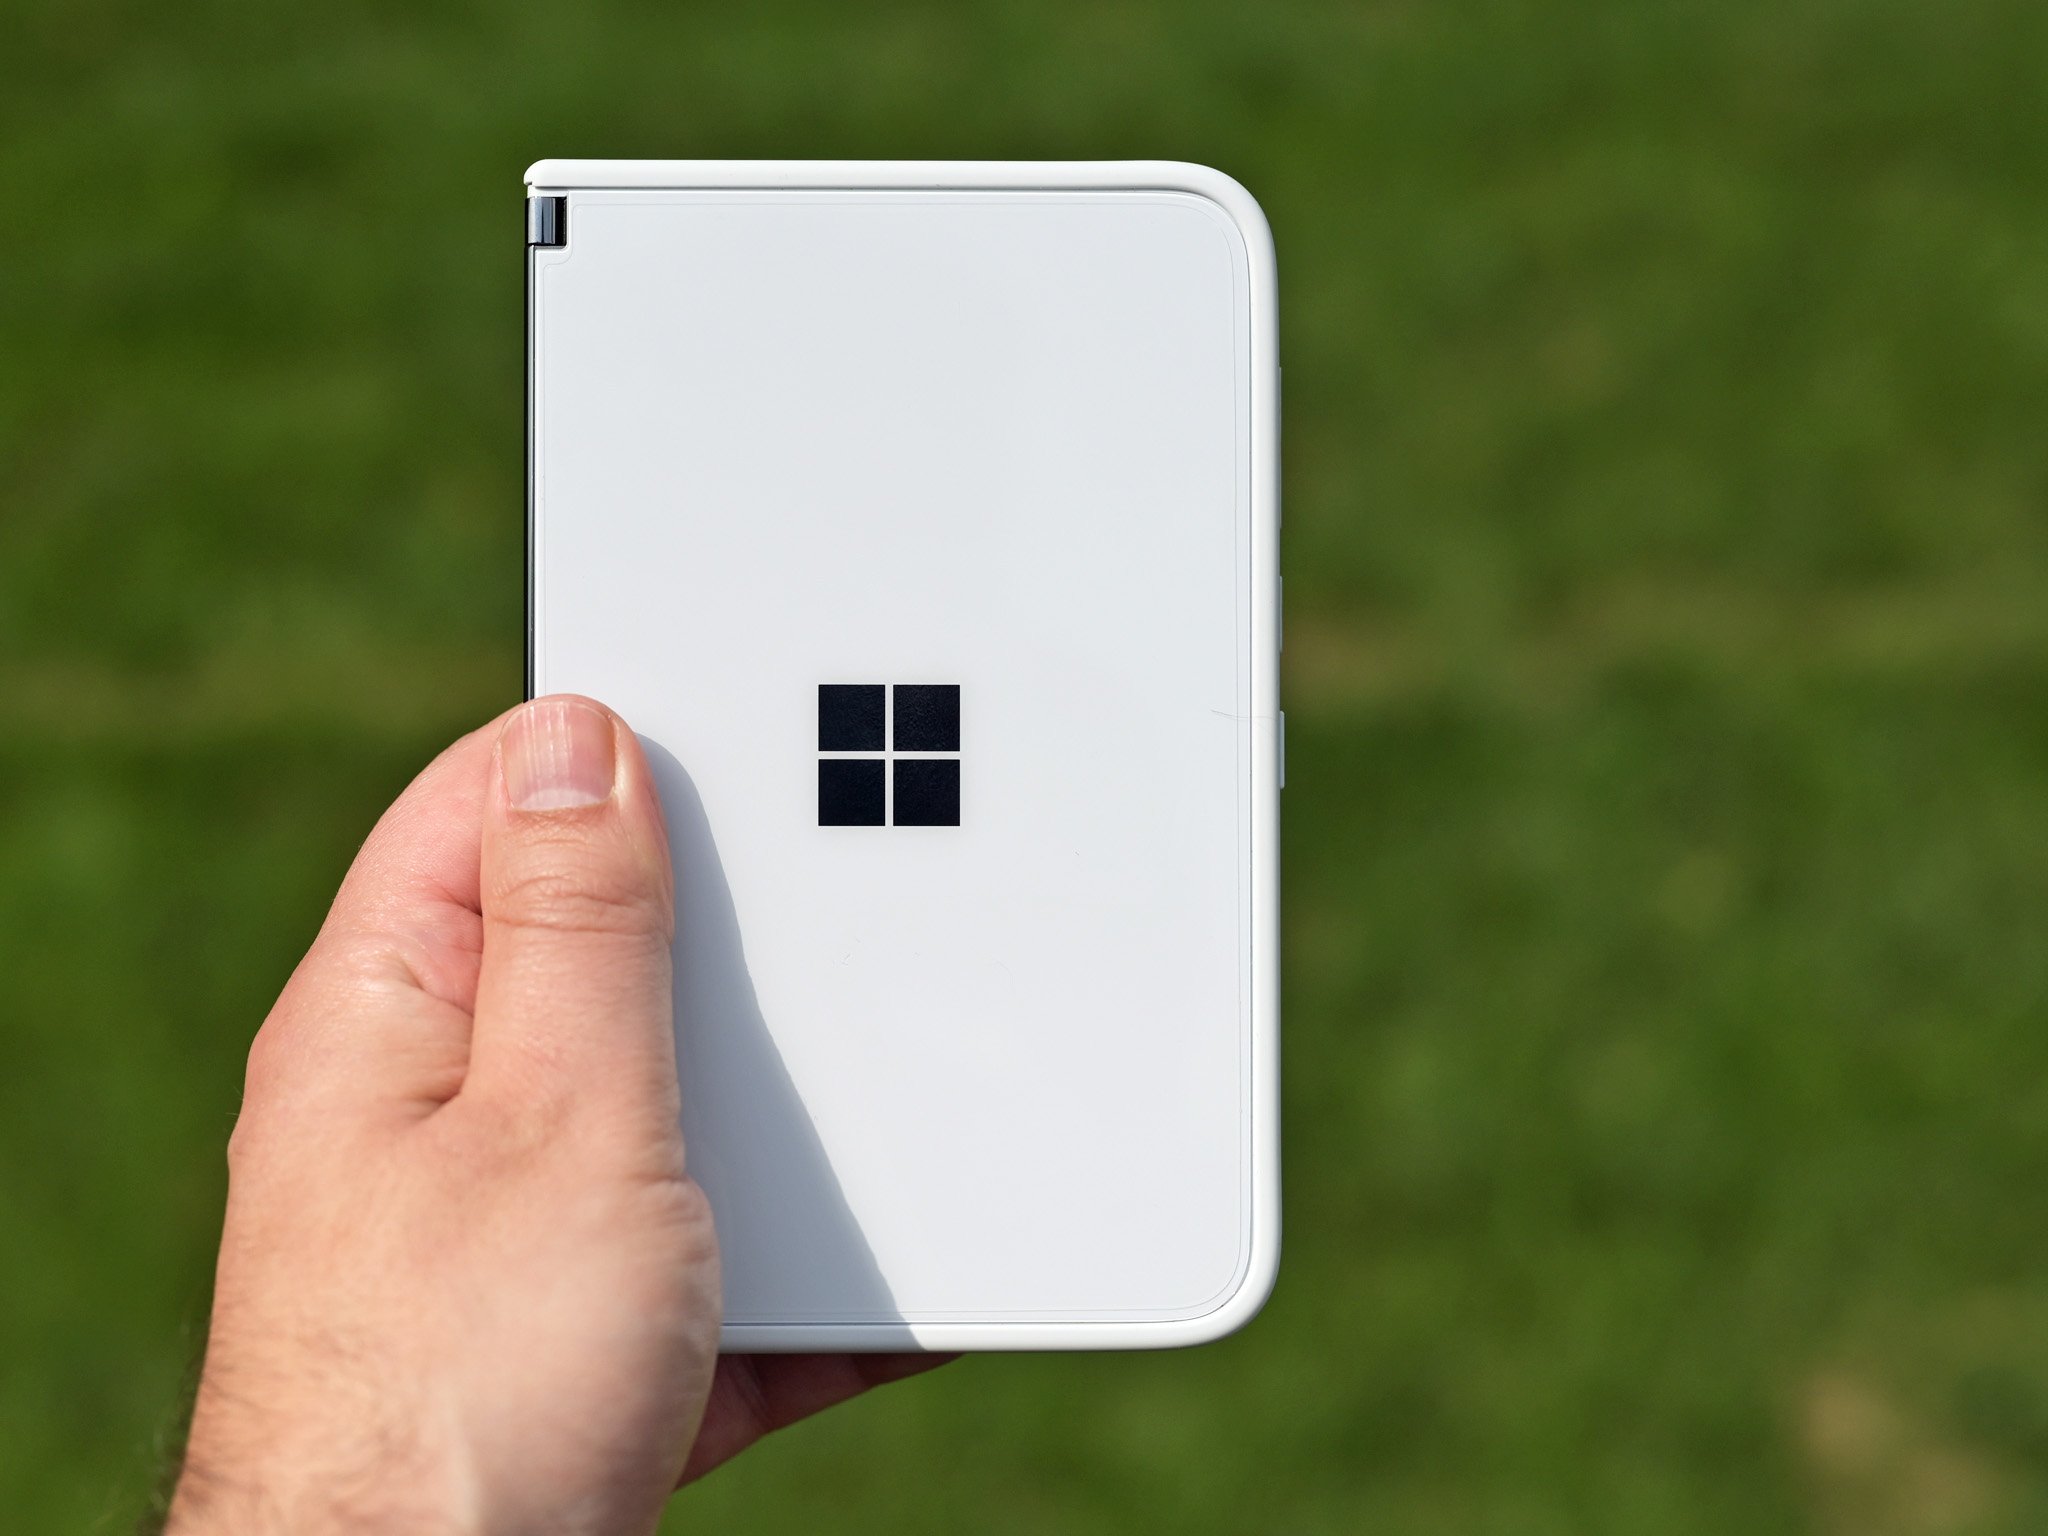 Surface Duo held up against a green, leafy backdrop